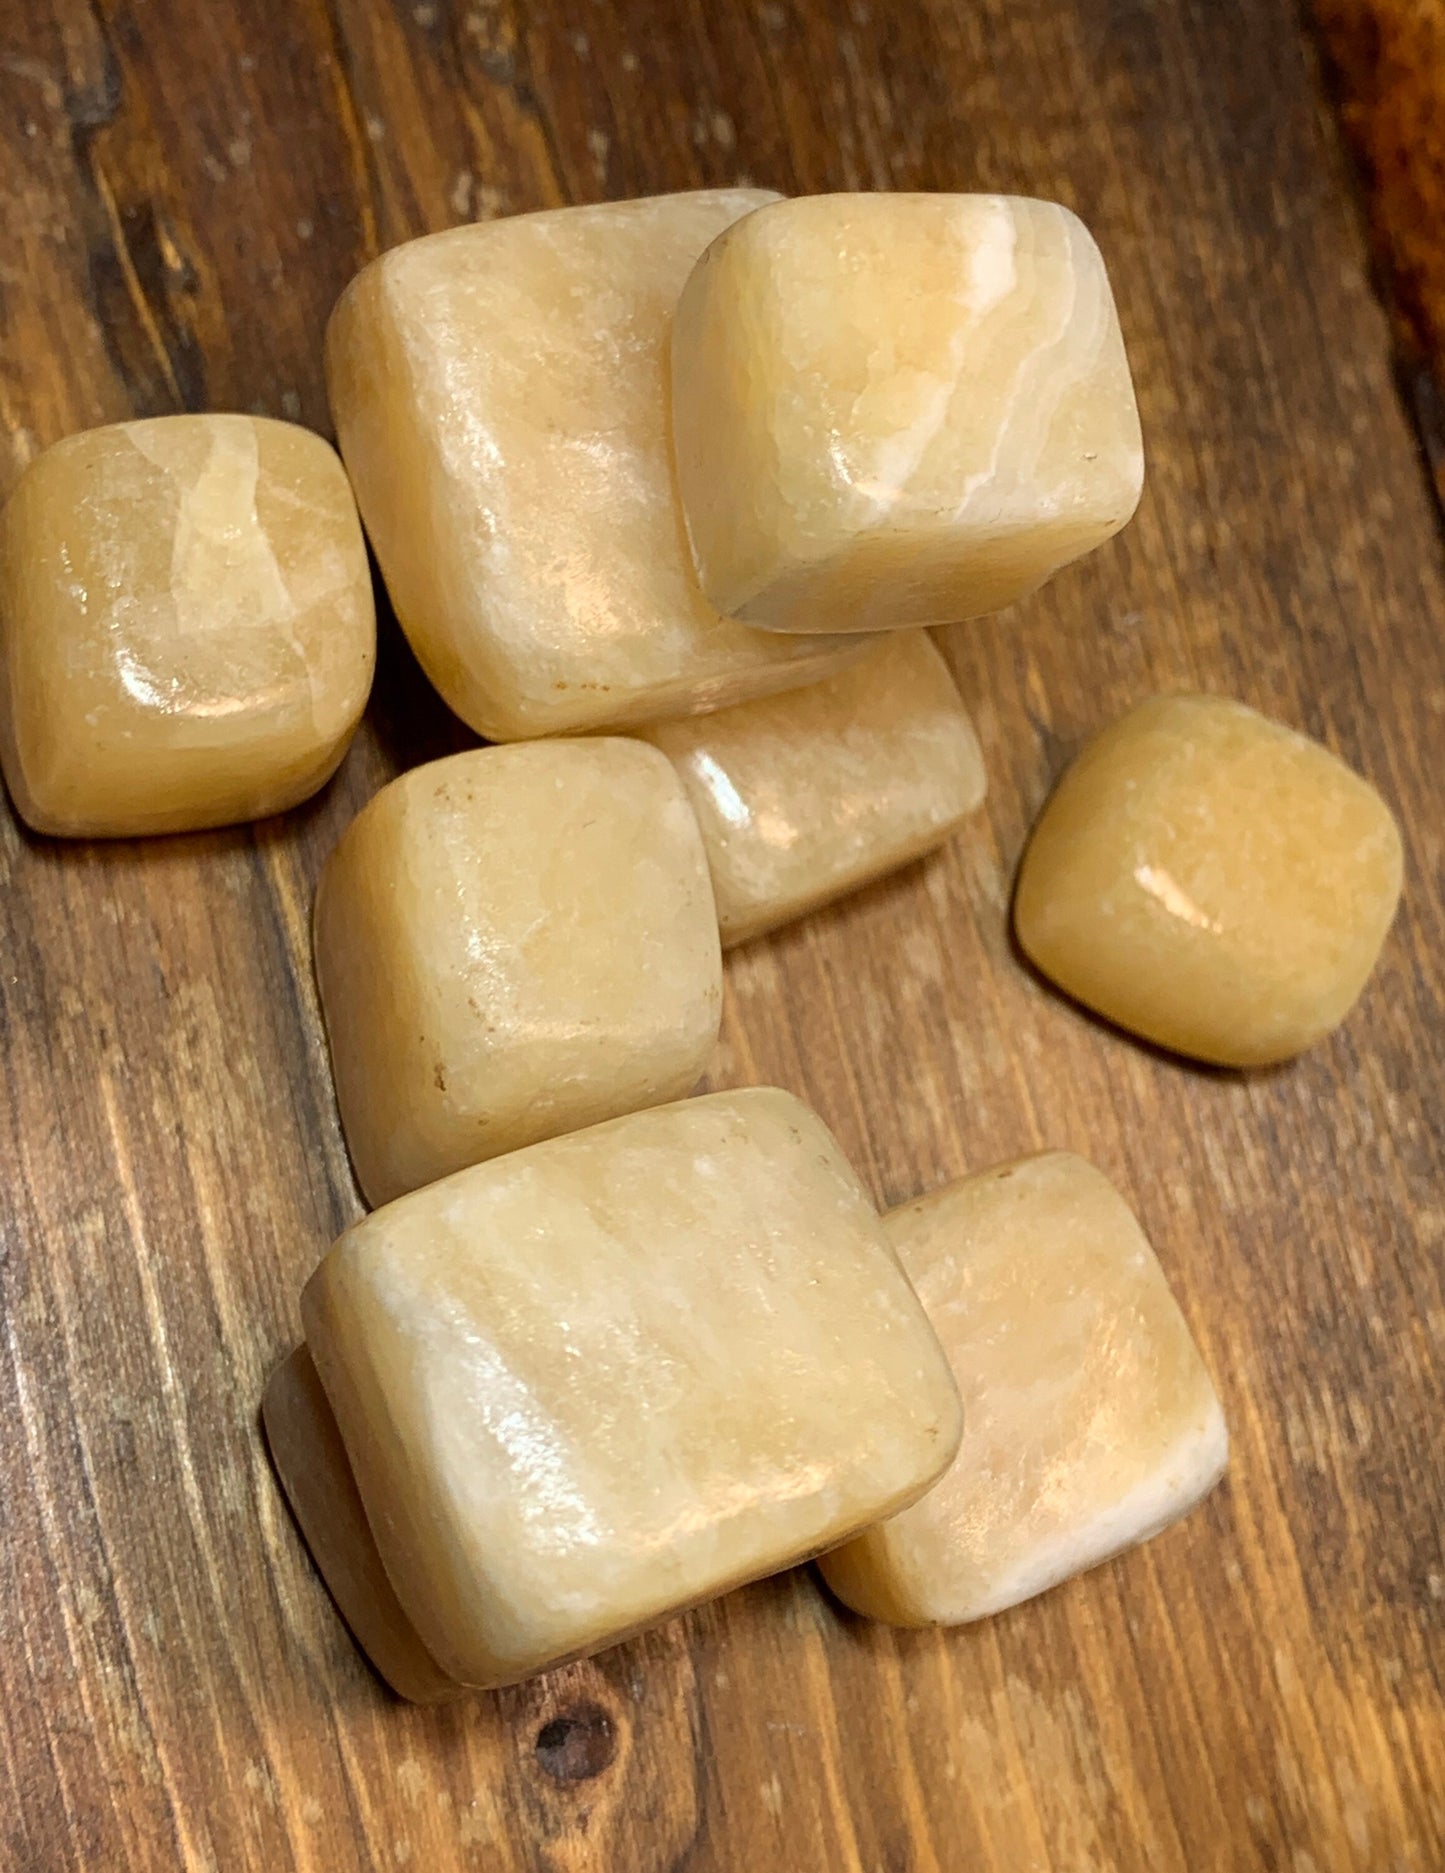 Orange Calcite (Approx. 3/4" - 1") BIN-1399 Helps you to see the double meaning. Powerful energy amplifier and cleanser.